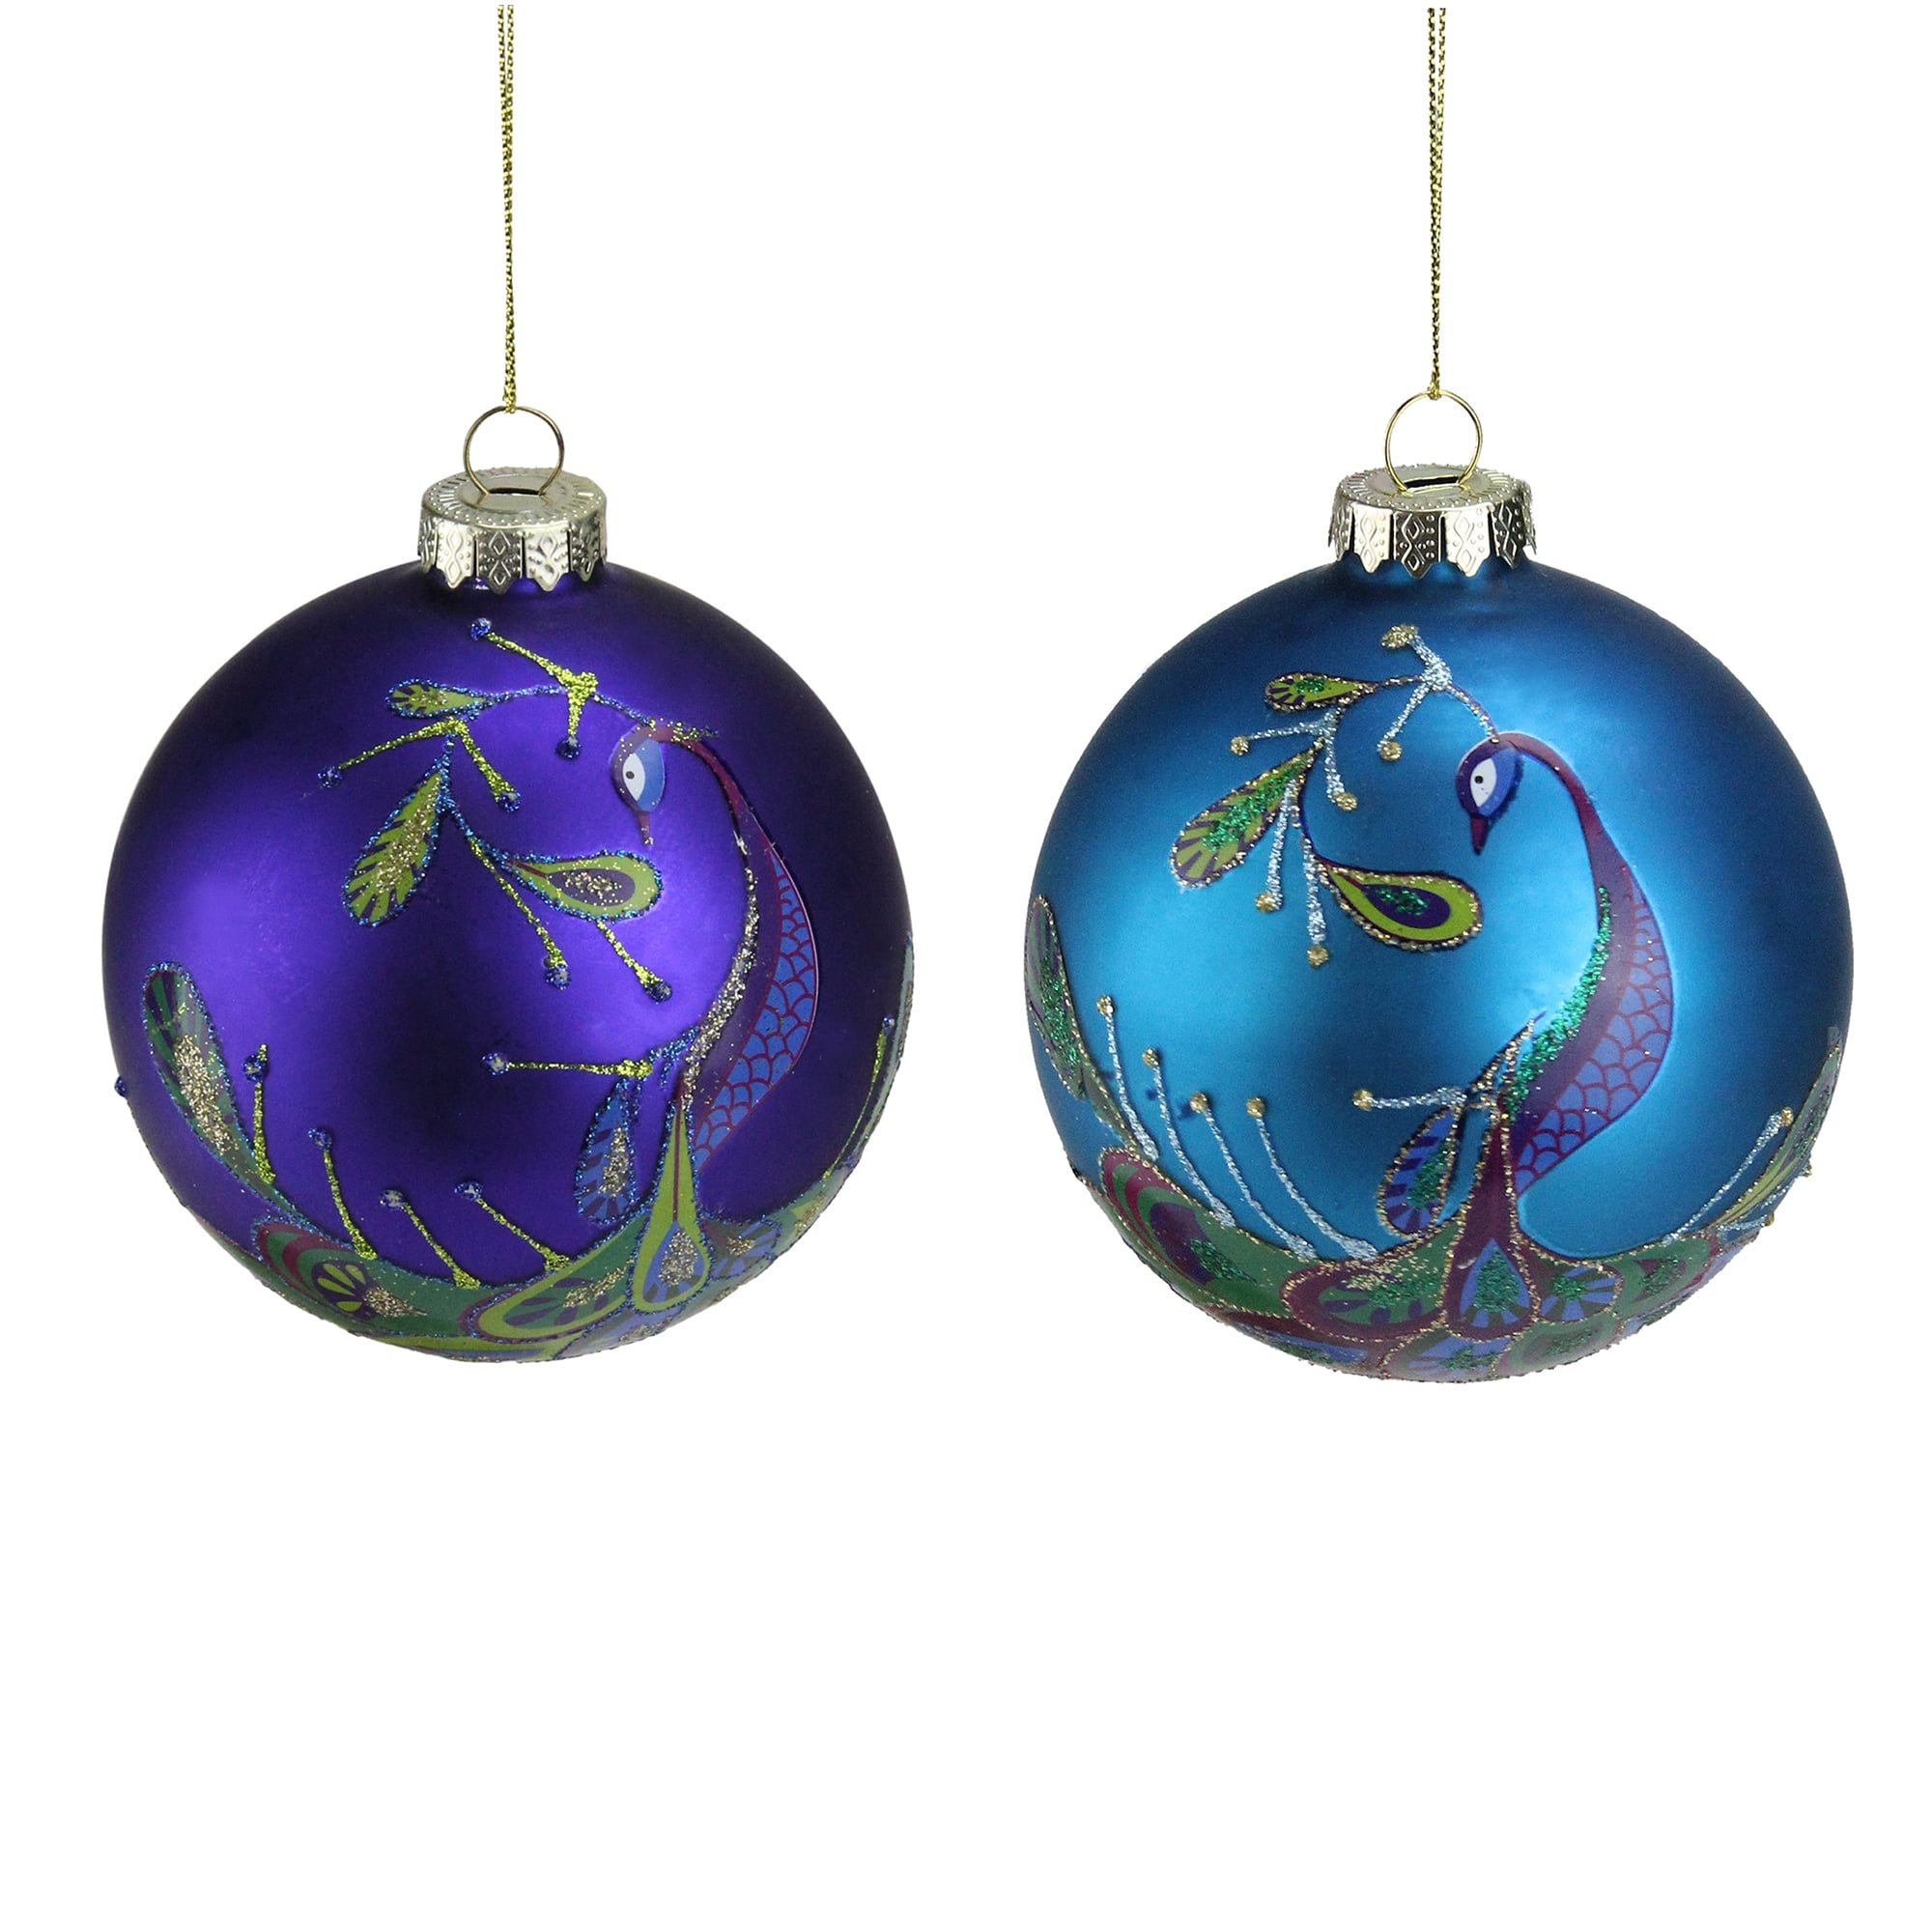 Bronze Glass Blown Ornament Set of 12 Baubles Christmas Toy Balls Painted Hanging Globe Ornament for Christmas Tree Decor 12 Balls 67mm/2.63